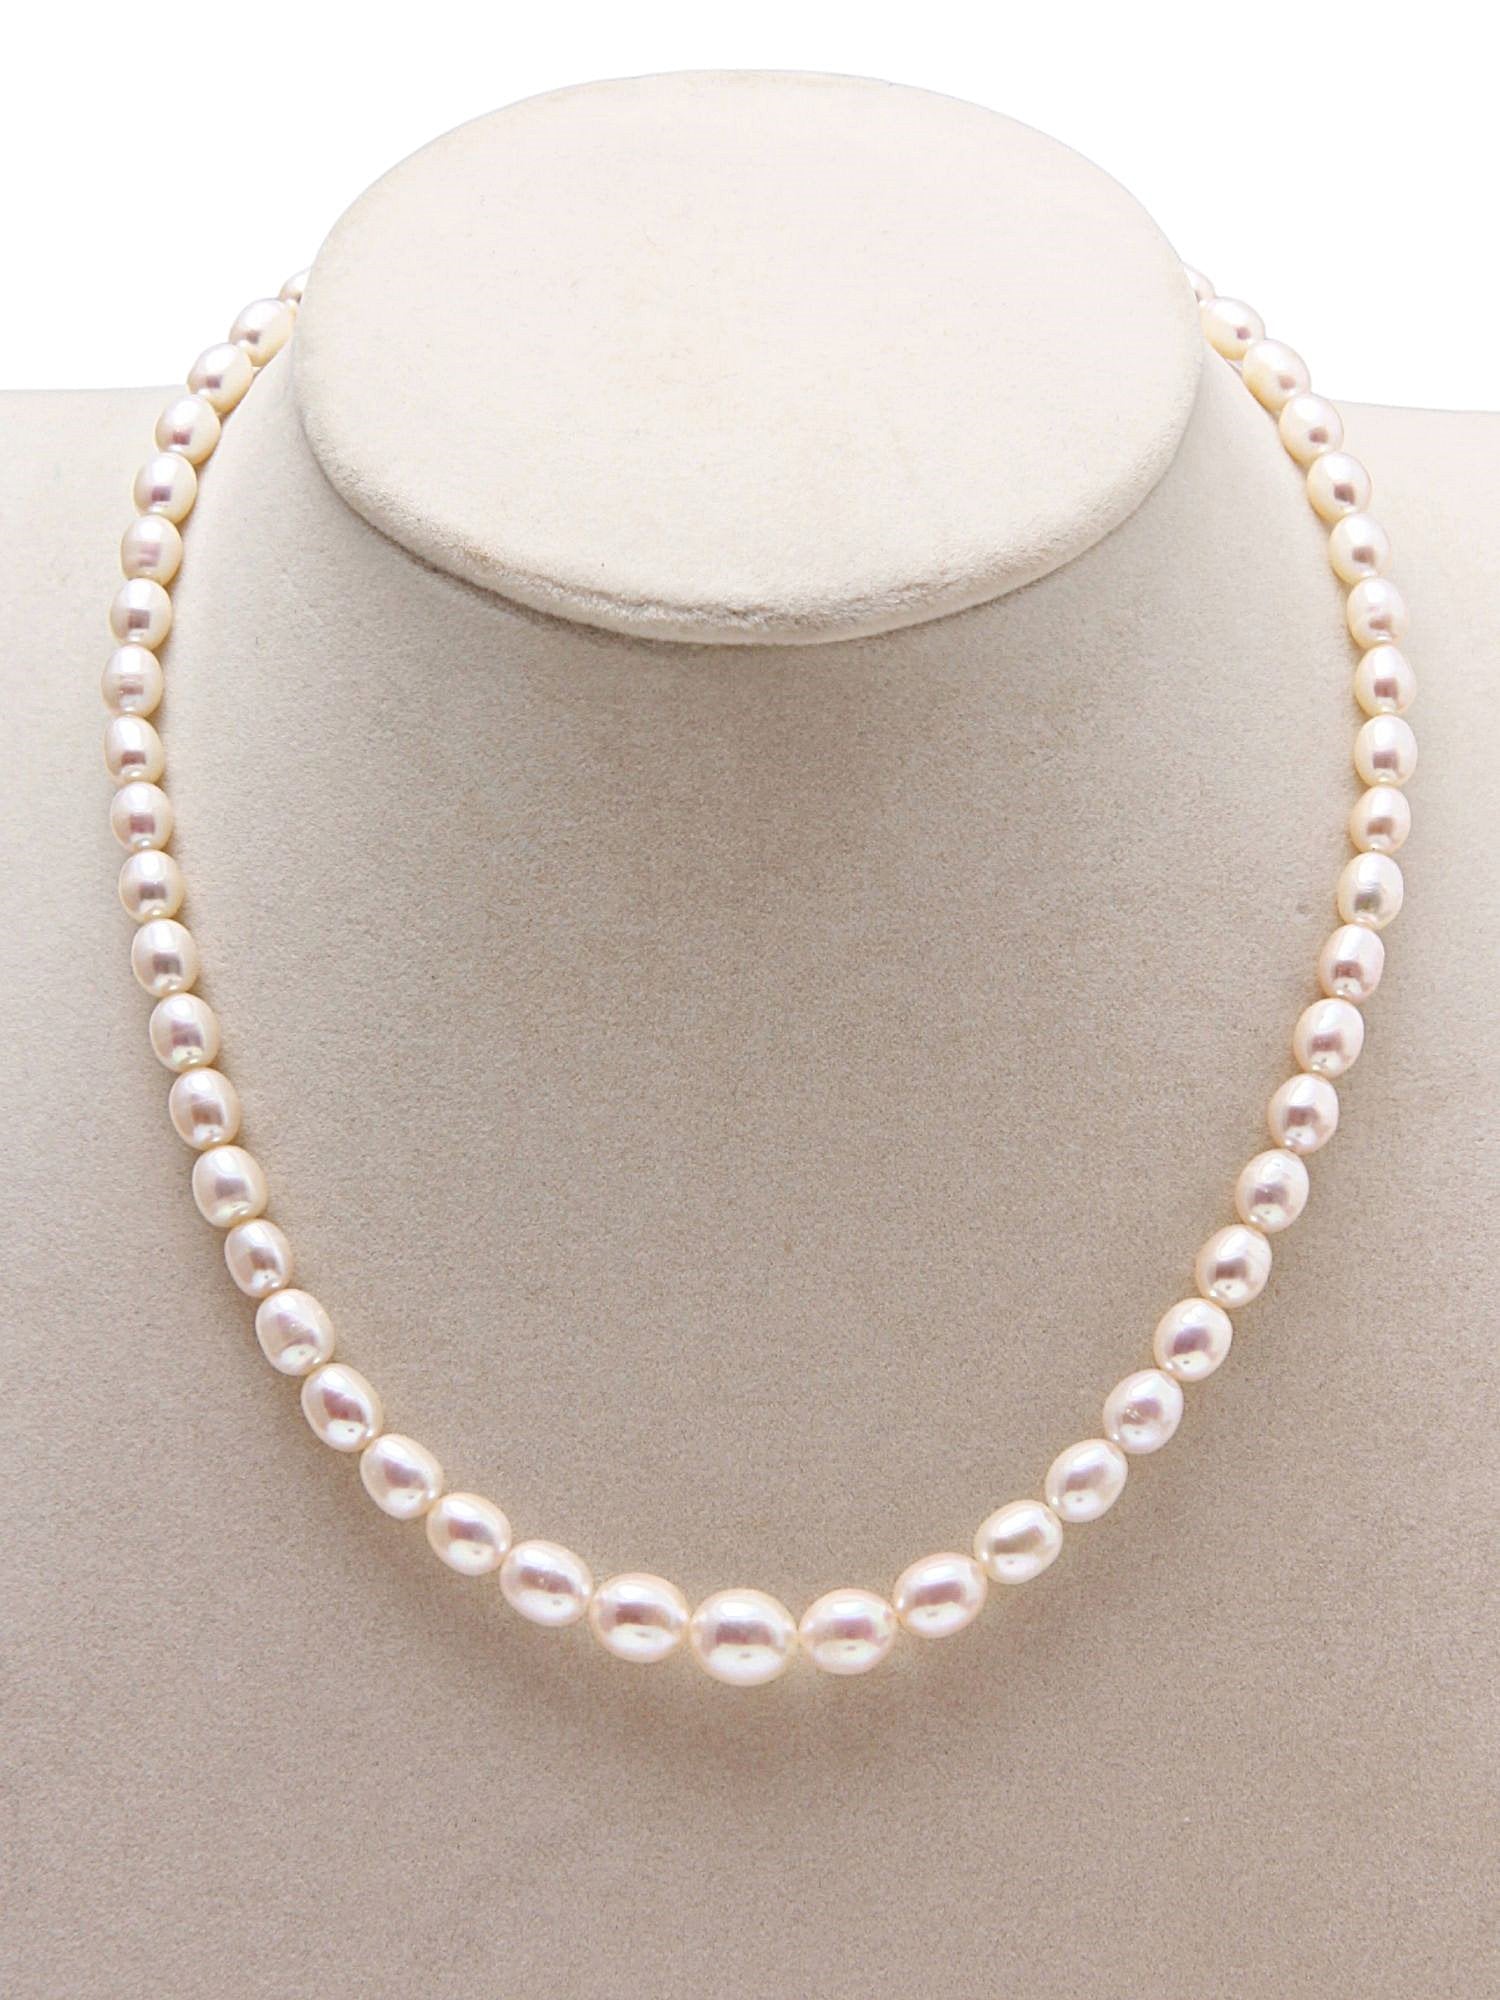 High Luster Oval White Freshwater Pearls Necklace AAA Grade with 92.5 Sterling Silver Clasp, 135 Carats - (F1027)